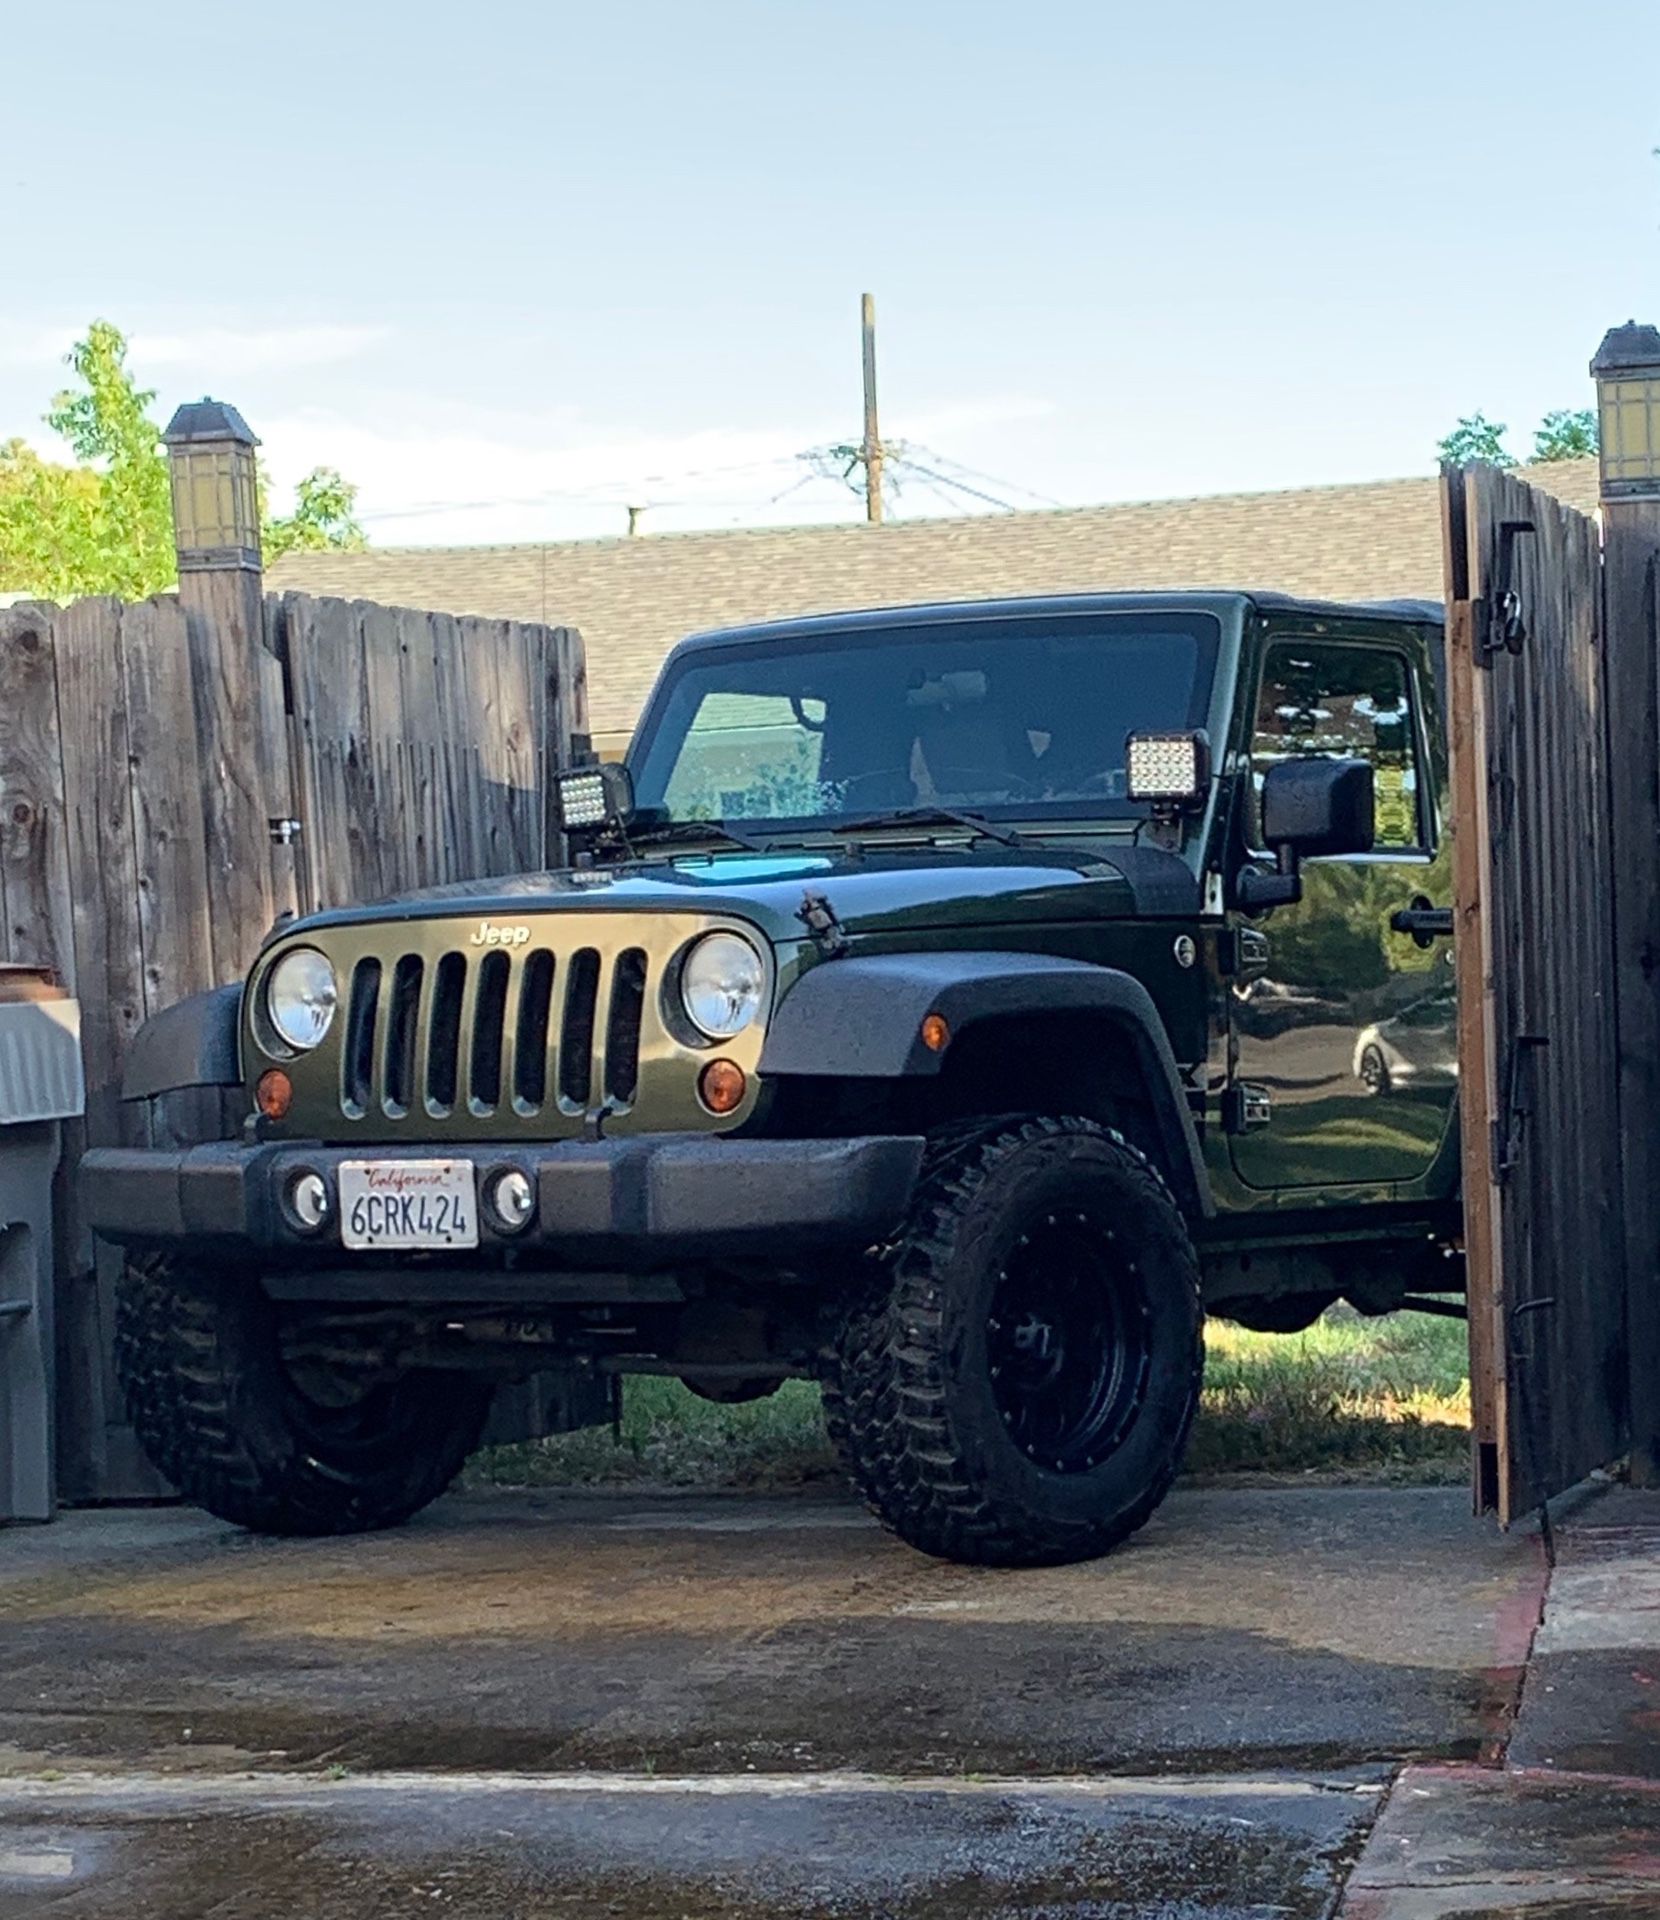 Jeep wrangler 2008 two door 150,000 miles 2 1/2 inch Rubicon lift on 33 inch Procomp tires